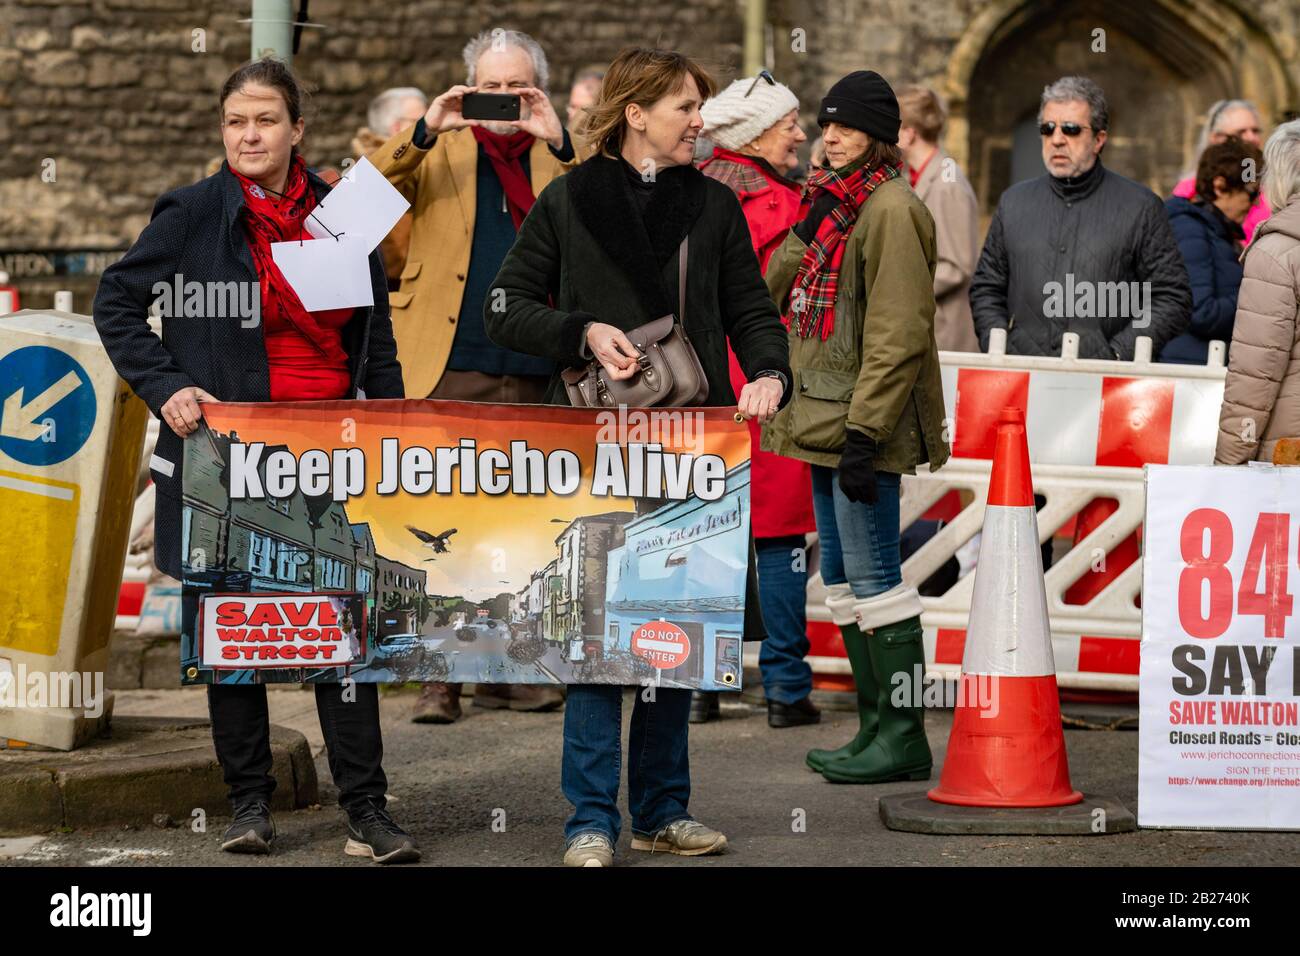 Oxford, Oxfordshire, UK. 1 March, 2020. Save Walton Street demonstration.  Residents and Businesses of Oxford's historic Jericho district protest the Oxfordshire County Council's closure of the main artery Walton Street. The street closed with out proper traffic or air quality surveys or consultation with residents and businesses. Credit: Sidney Bruere/Alamy Live News Stock Photo